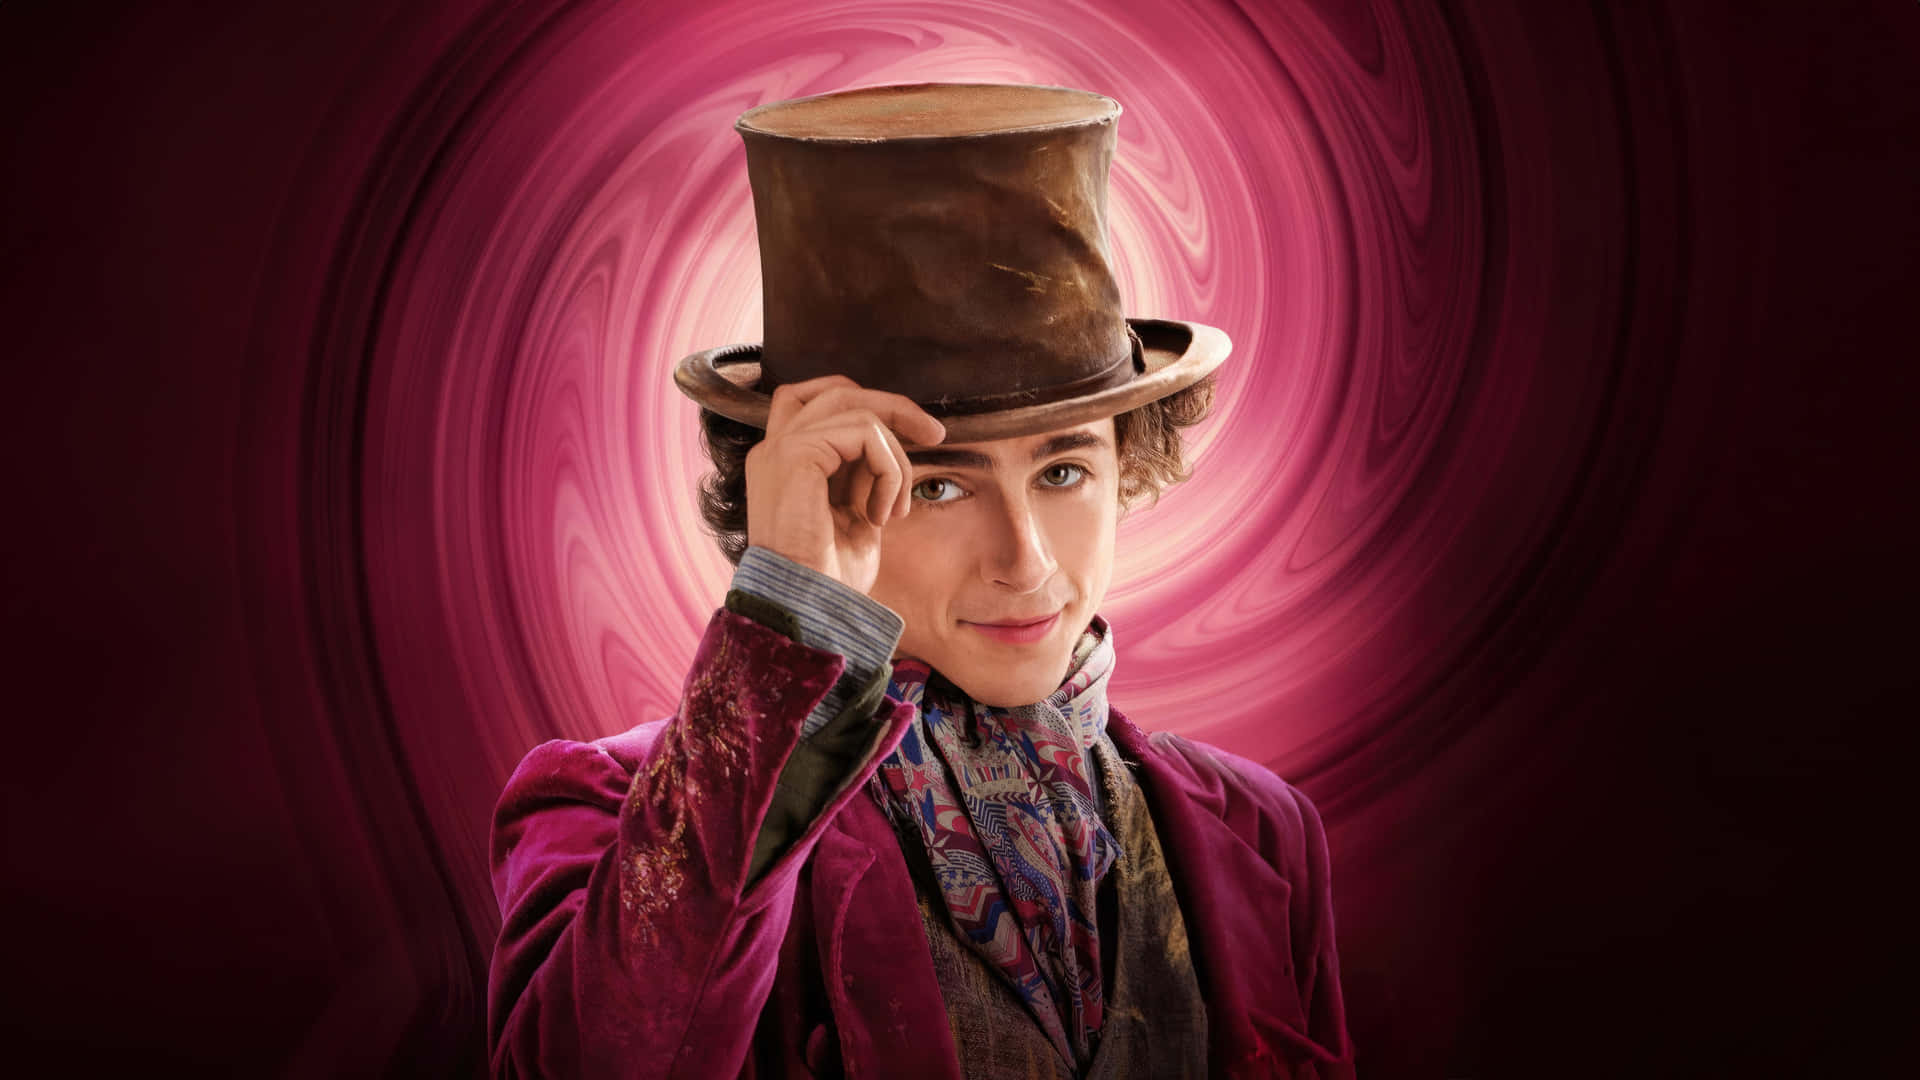 Willy Wonka Tipping Hat Wallpaper